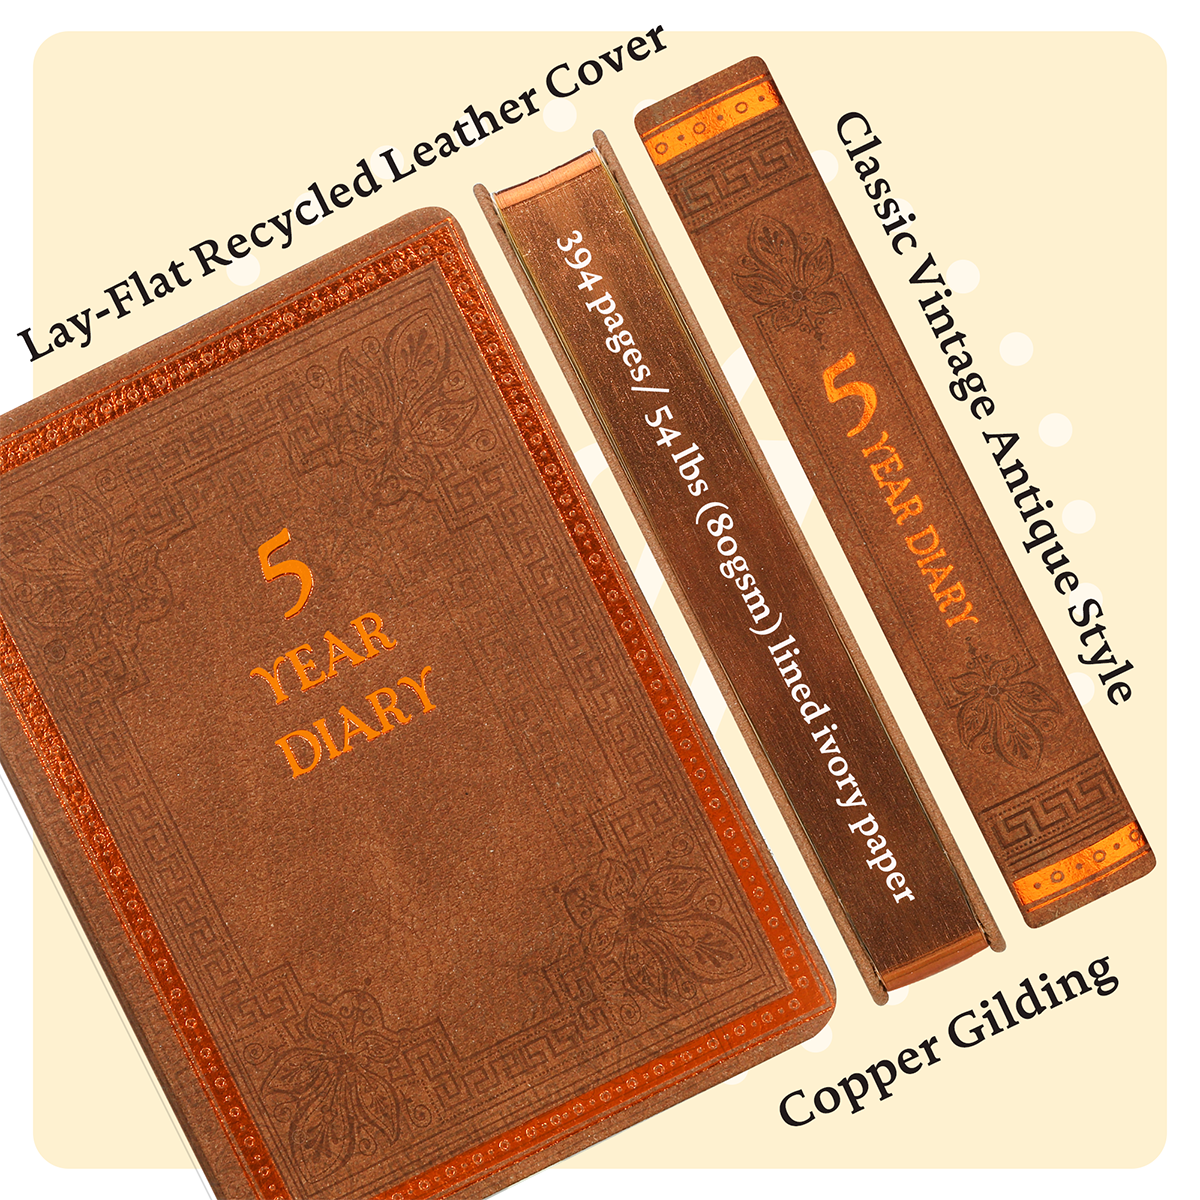 5 Year Recycled Leather Diary (Brown)